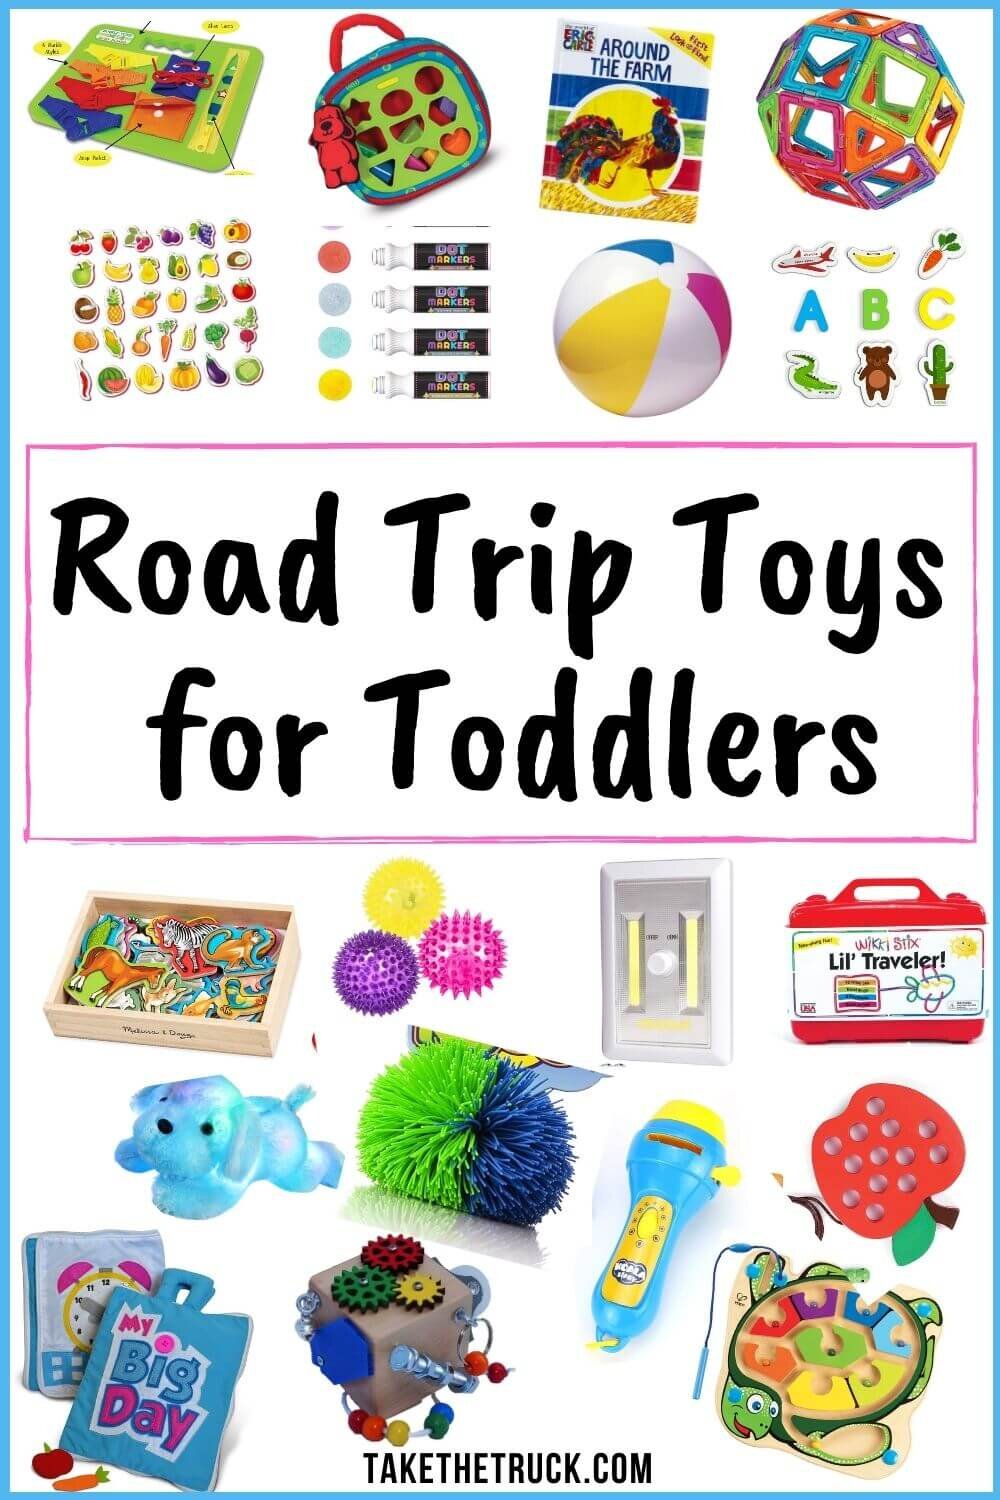 20+ Road Trip Toys For Toddlers - PhotoJeepers